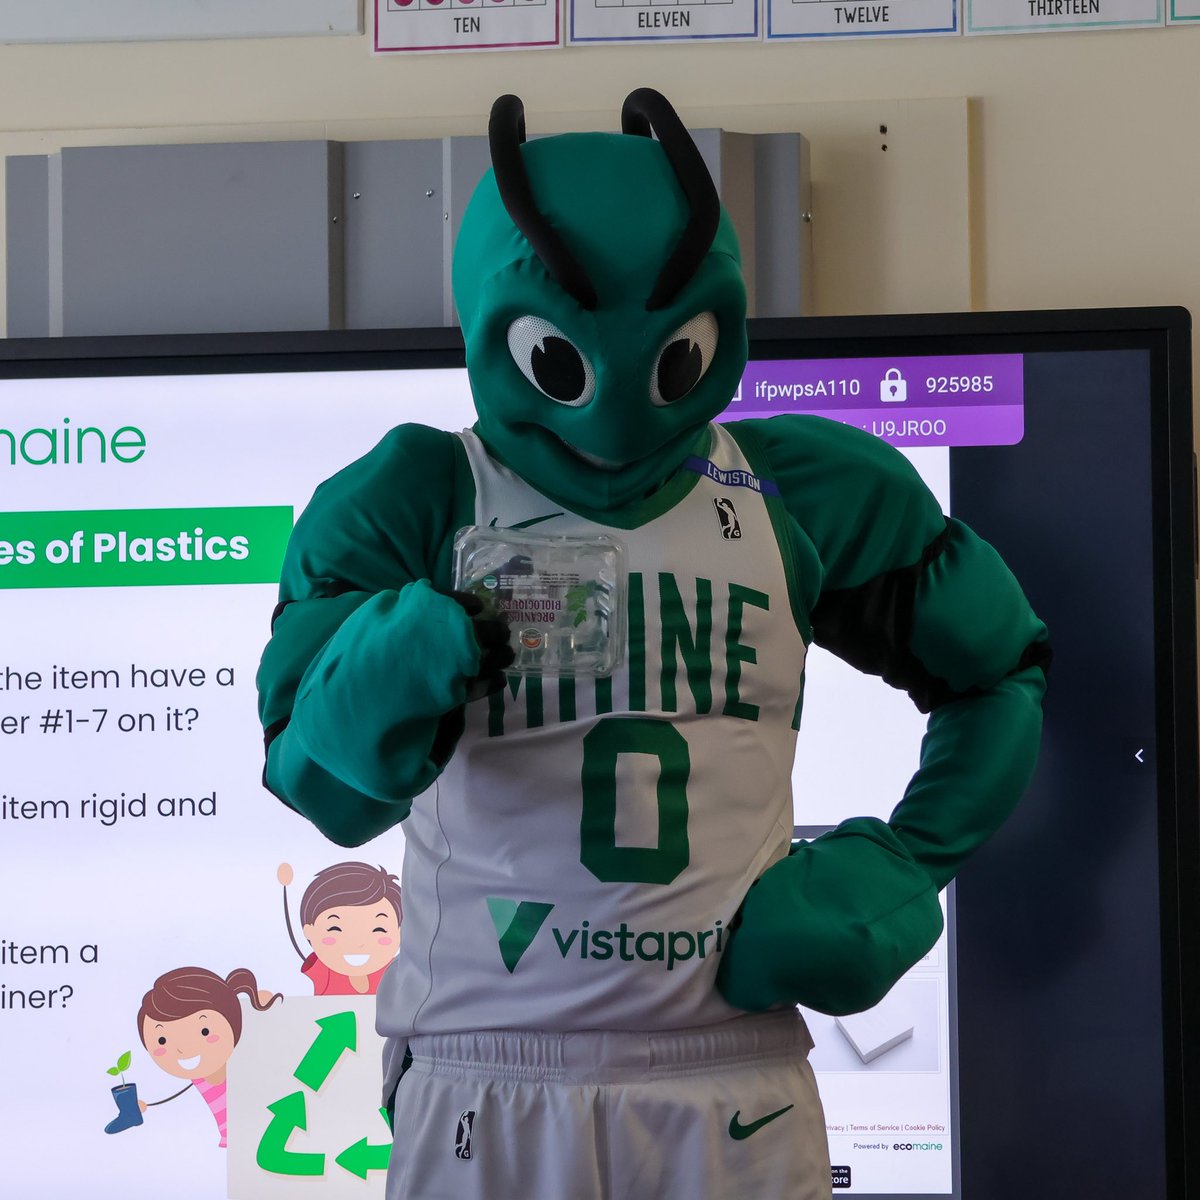 To celebrate #EarthDay Crusher and @ecomaine stopped by the Windham Primary School to teach students proper recycling habits.